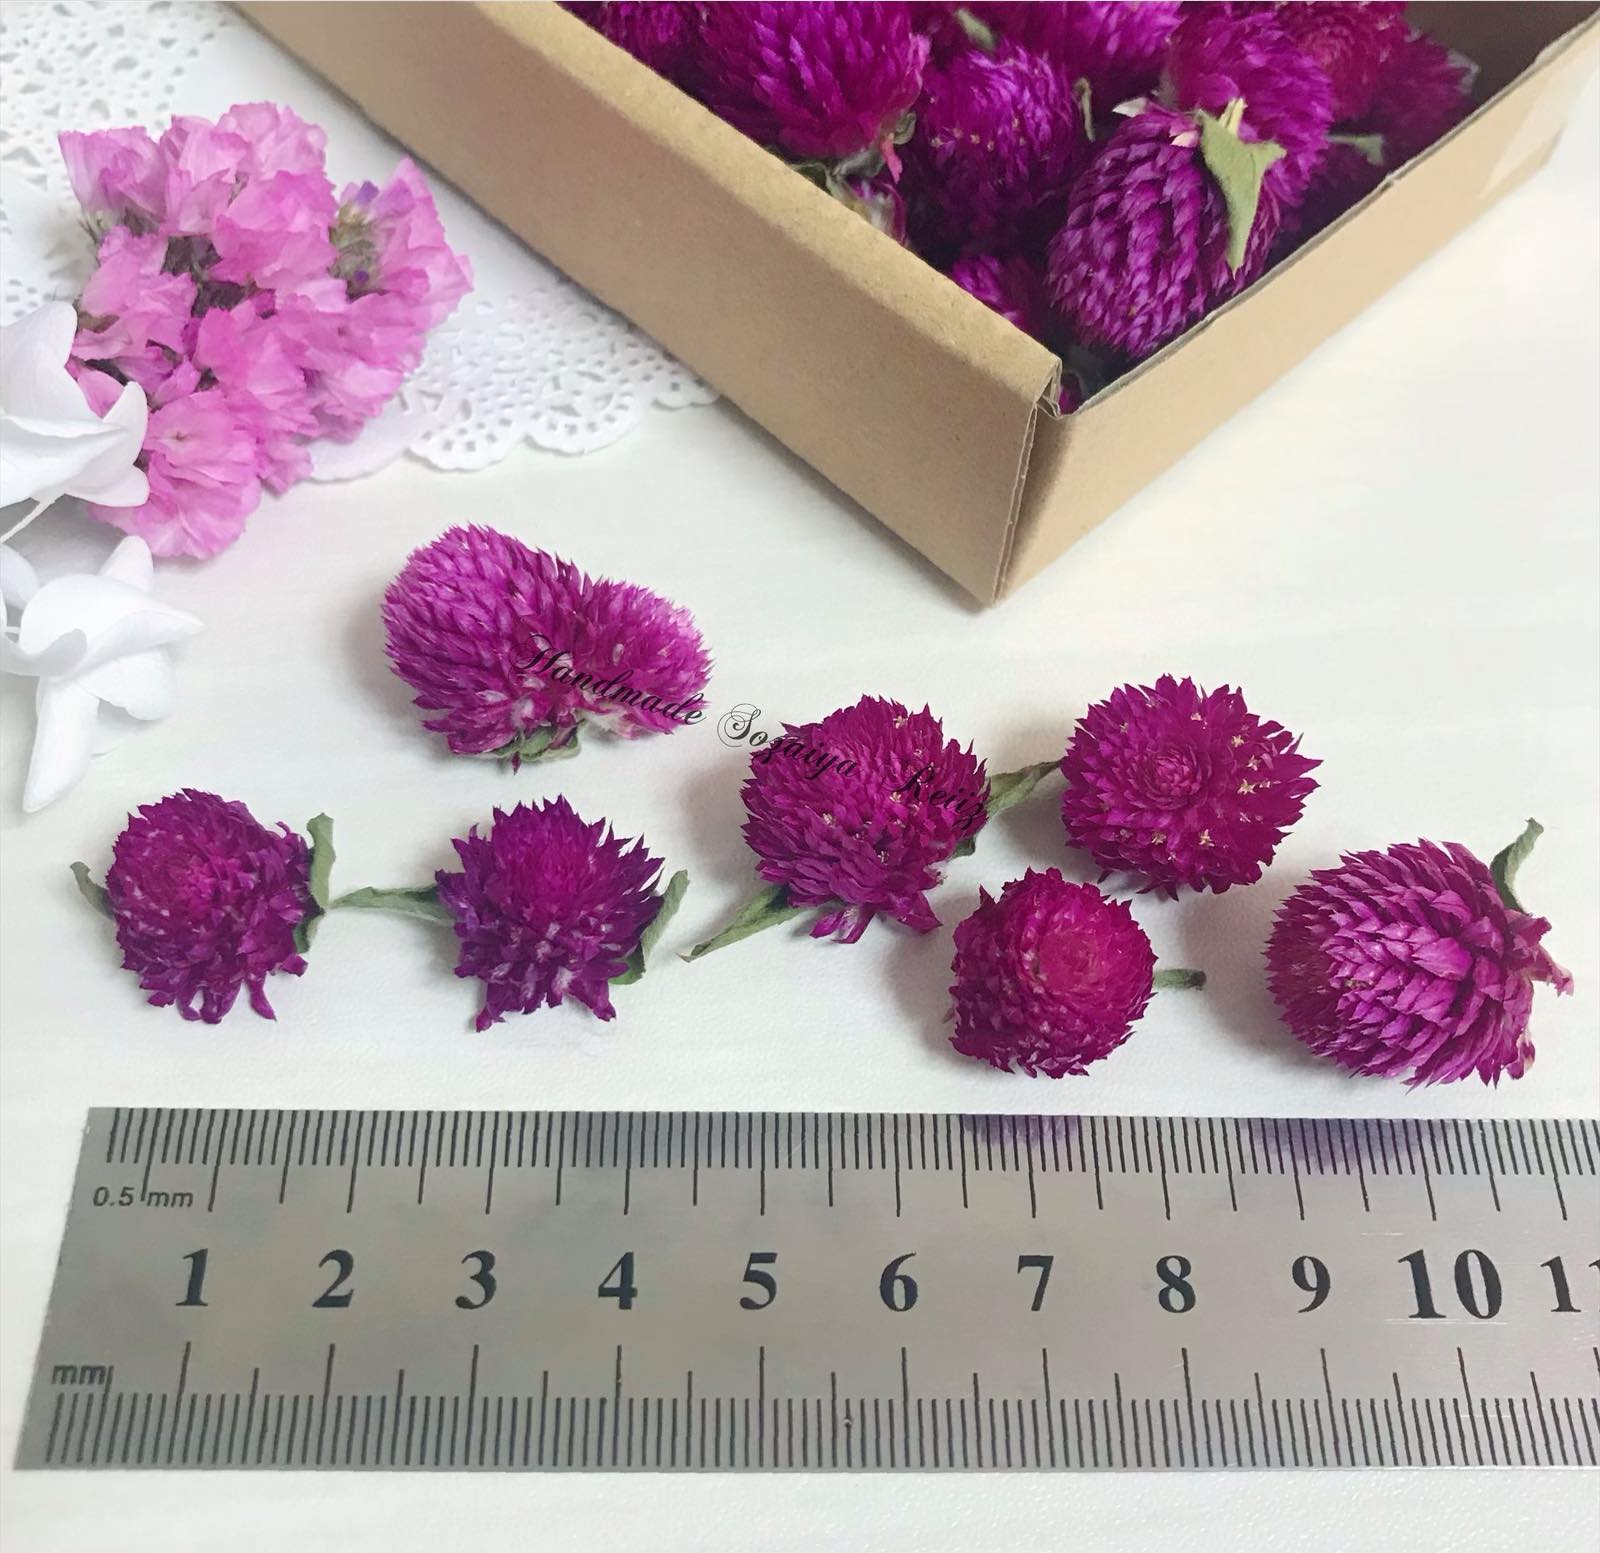  dry flower thousand day . head [ approximately 60 piece rom and rear (before and after) ] herbarium gel candle resin lease, aroma candle pot-pourri etc.. material for flower arrangement, handmade material * raw materials 